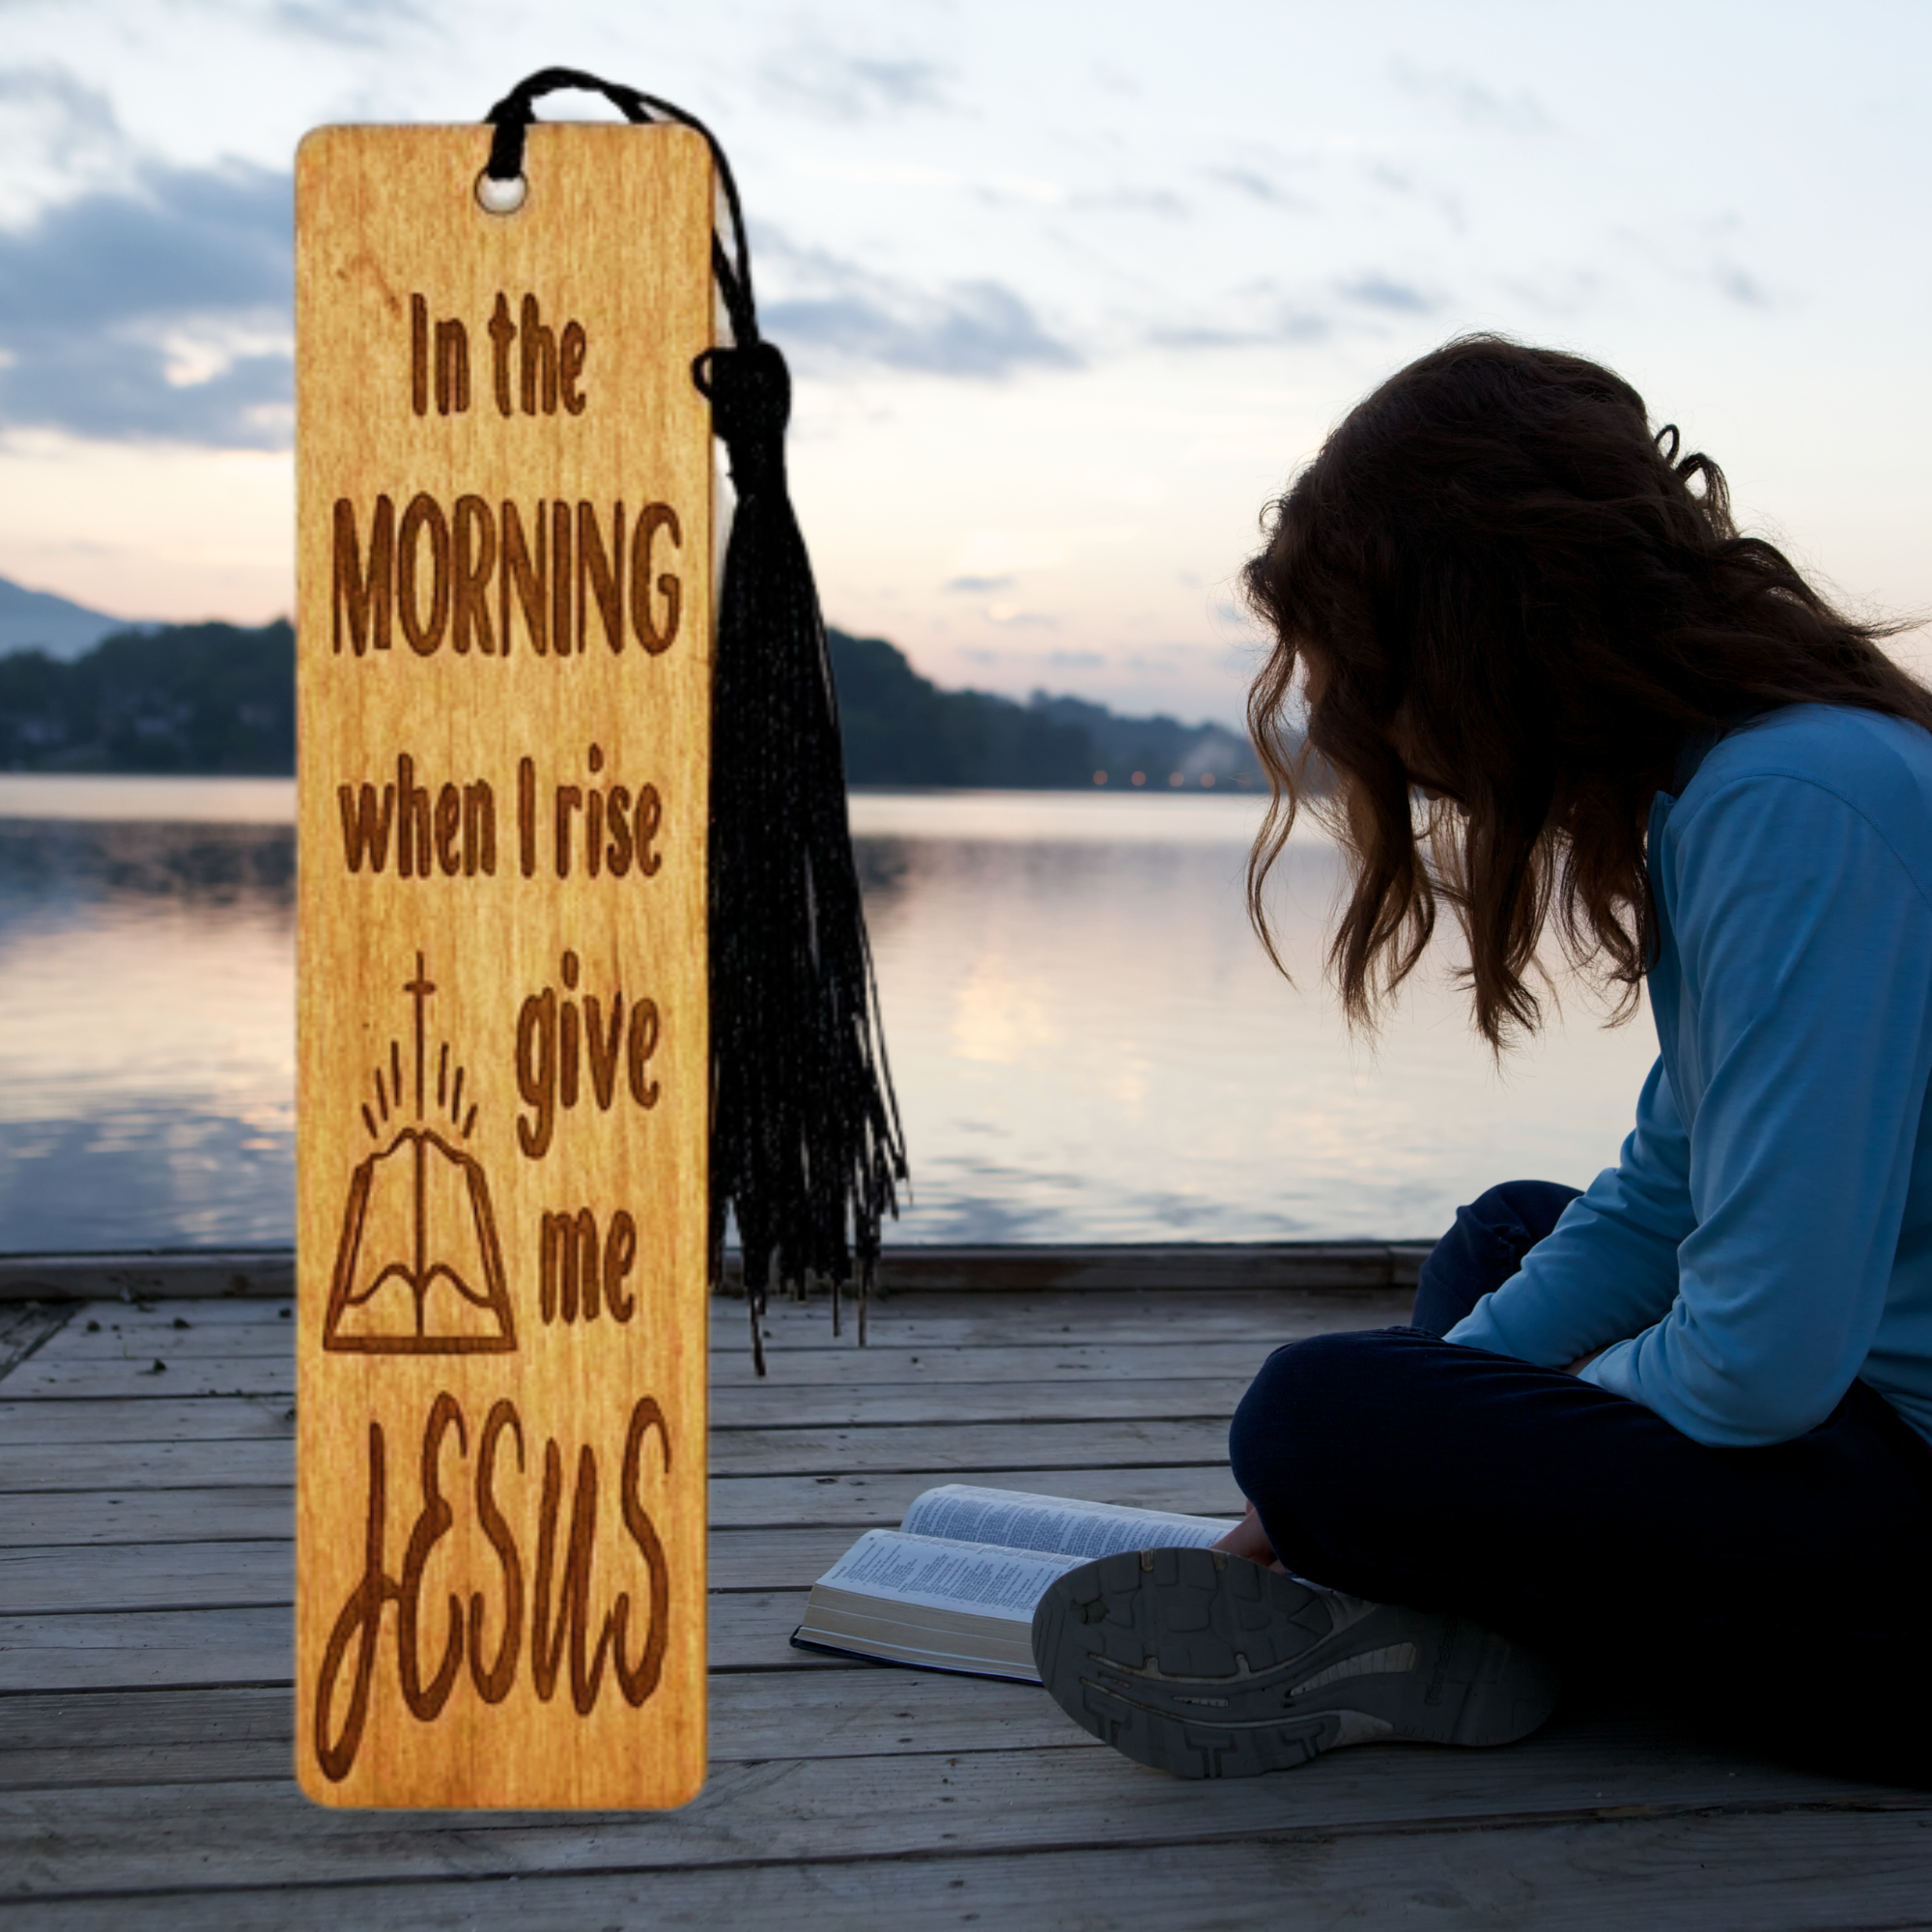 In the morning give me Jesus Wooden Bookmark